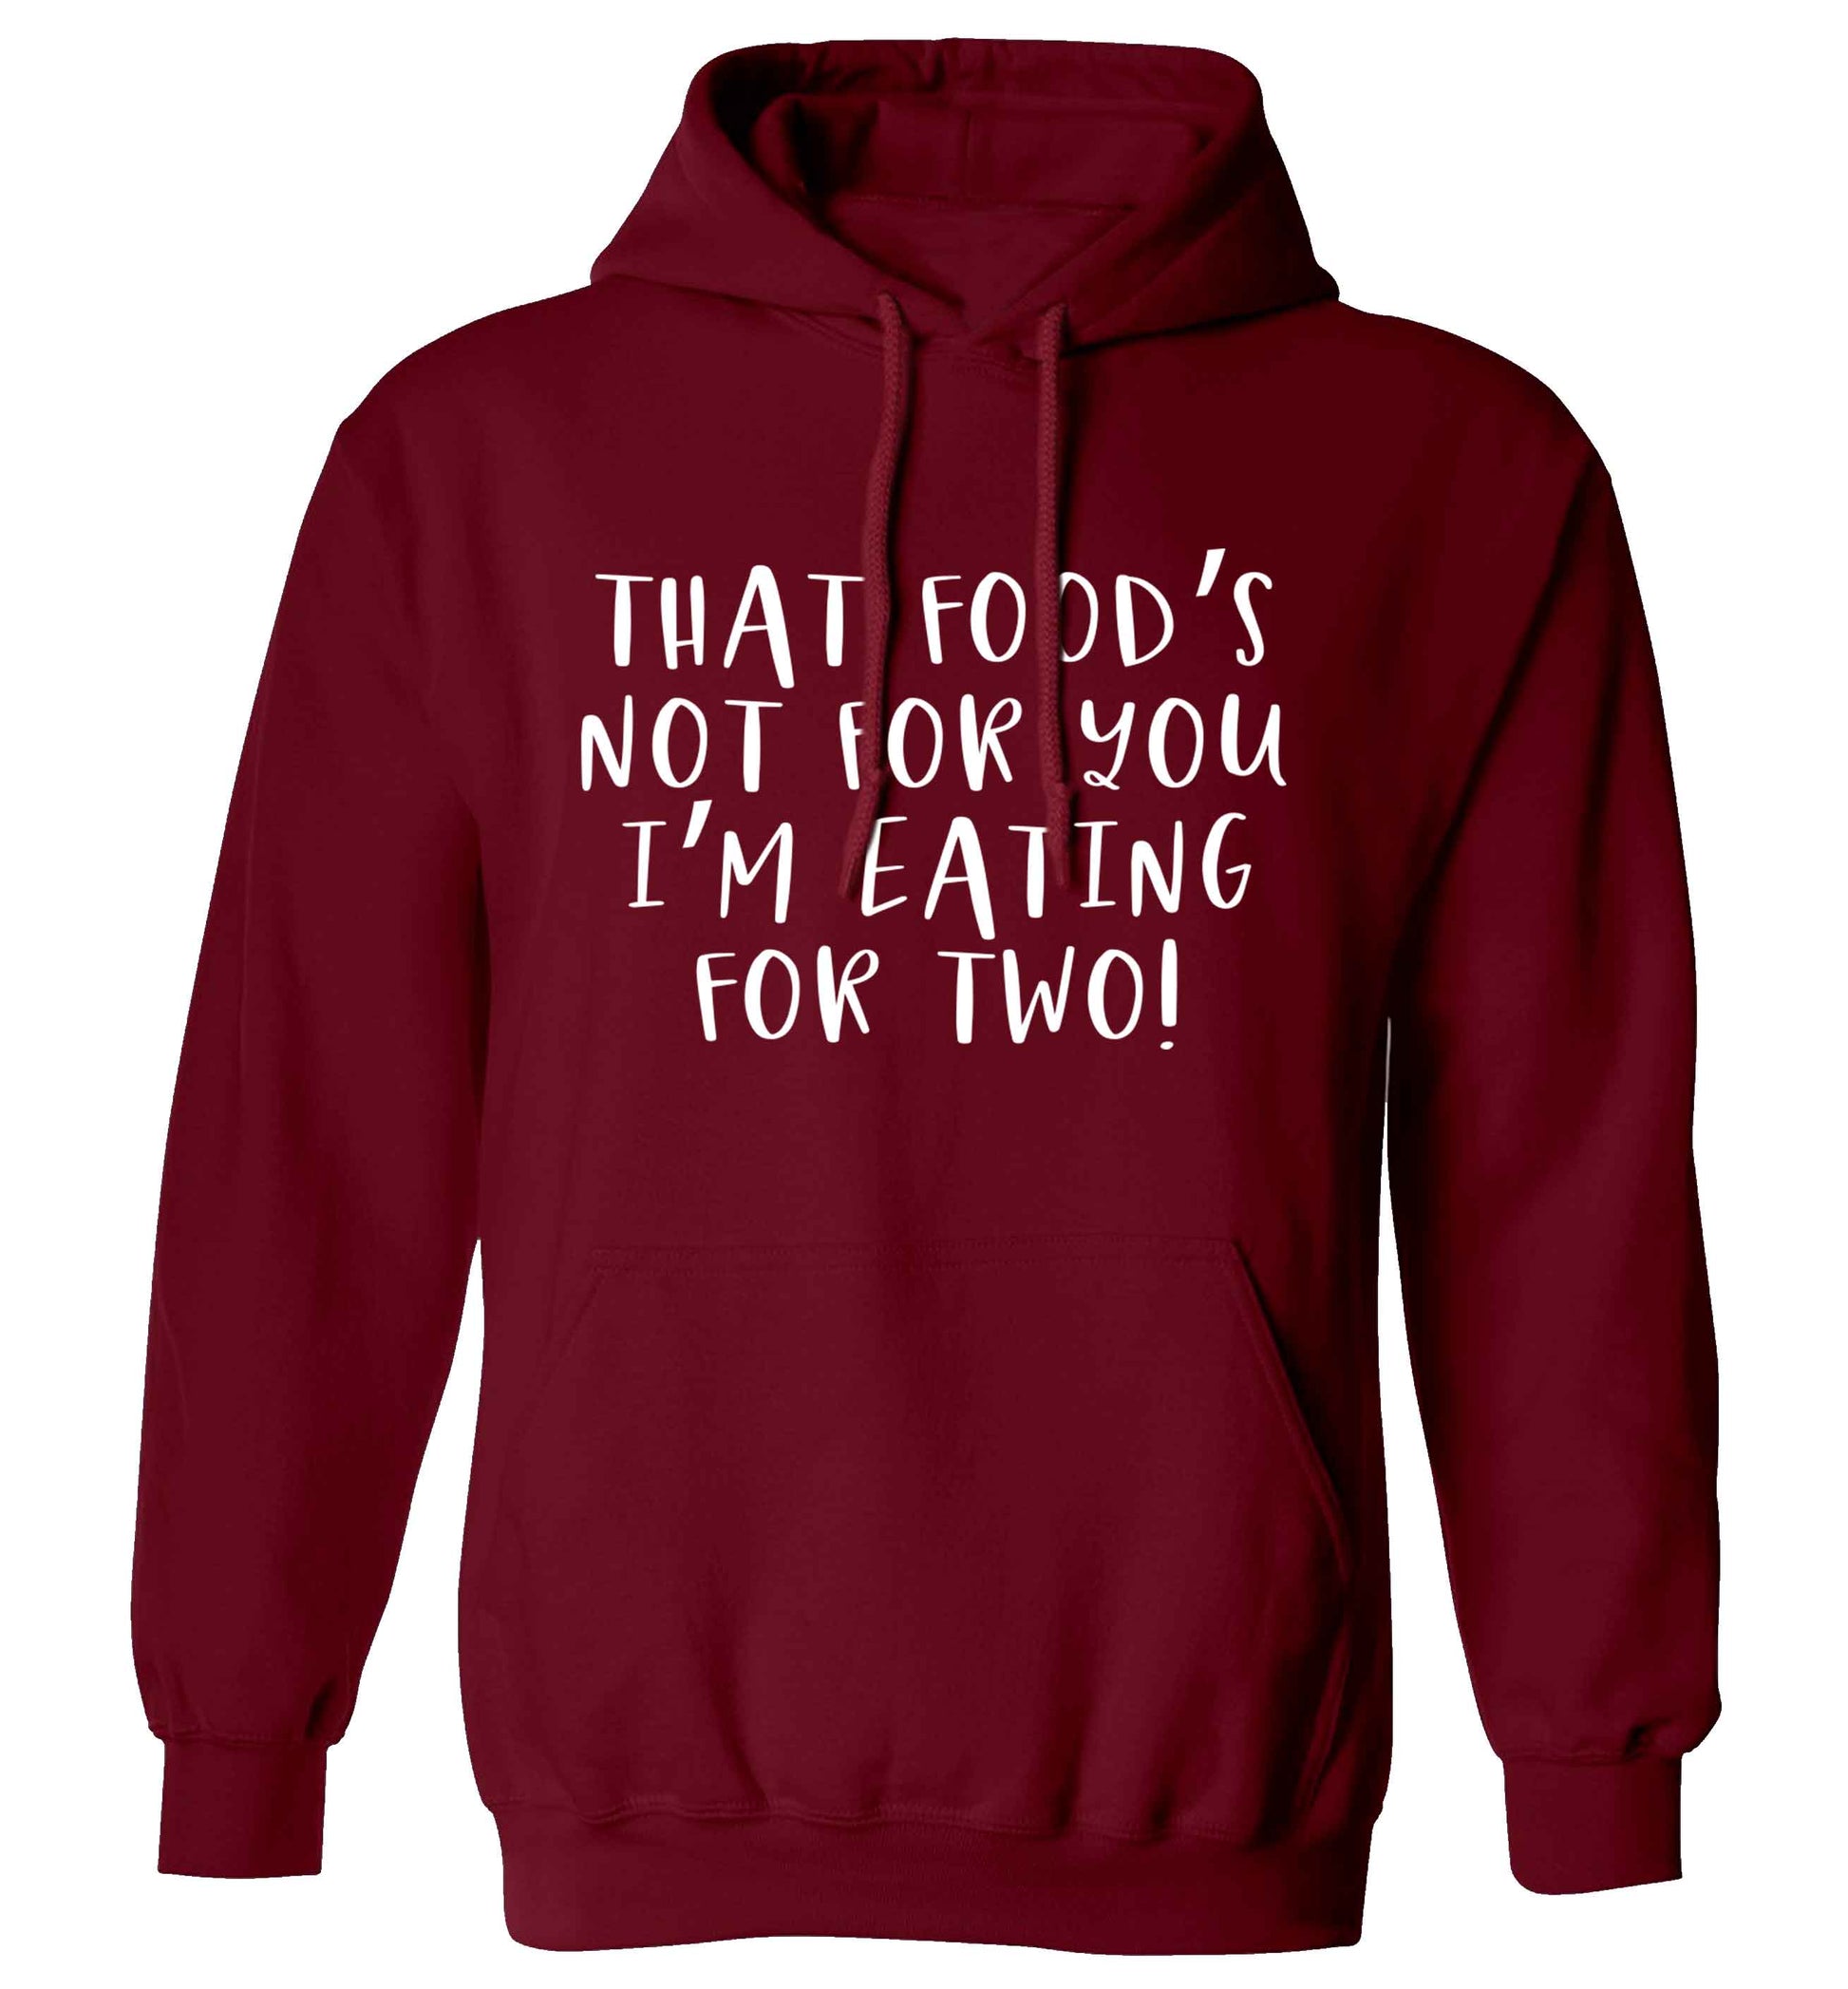 That food's not for you I'm eating for two adults unisex maroon hoodie 2XL